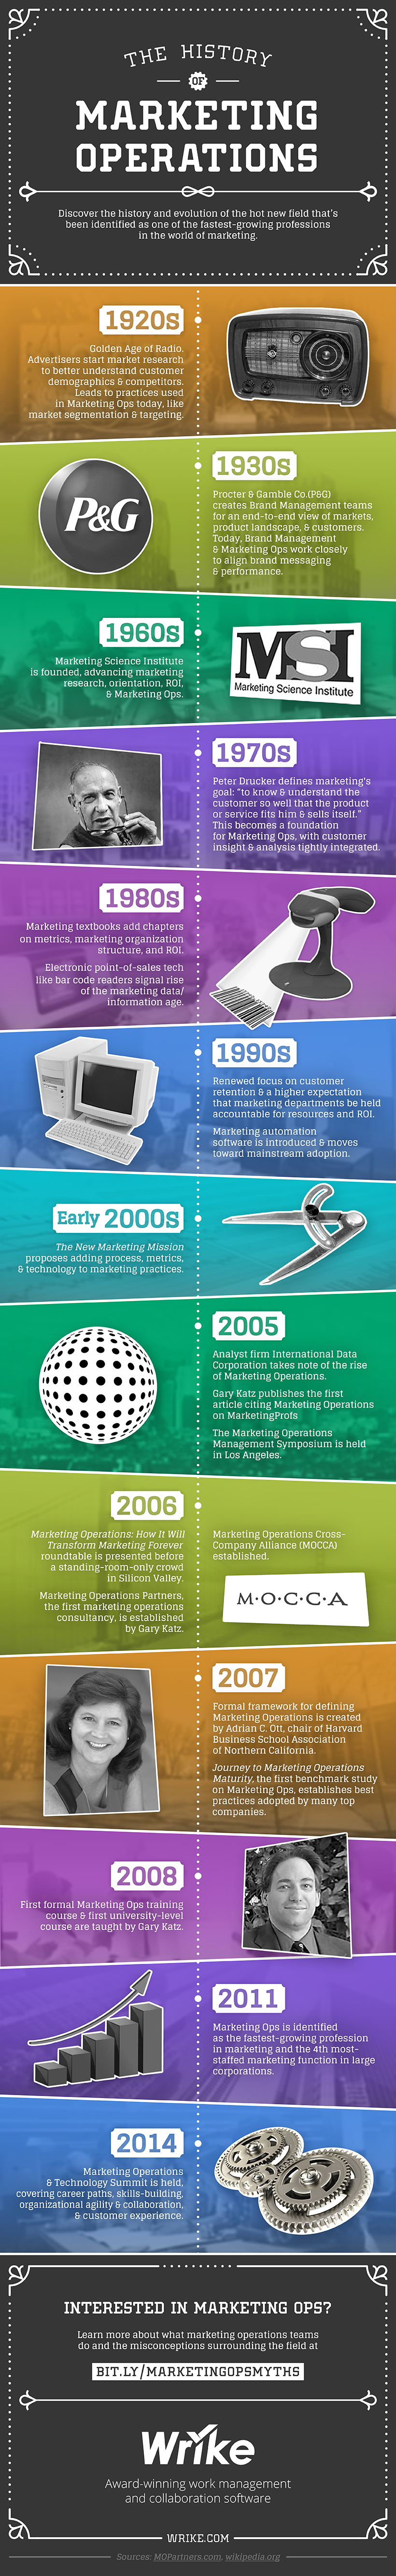 The History of Marketing Operations (Infographic)